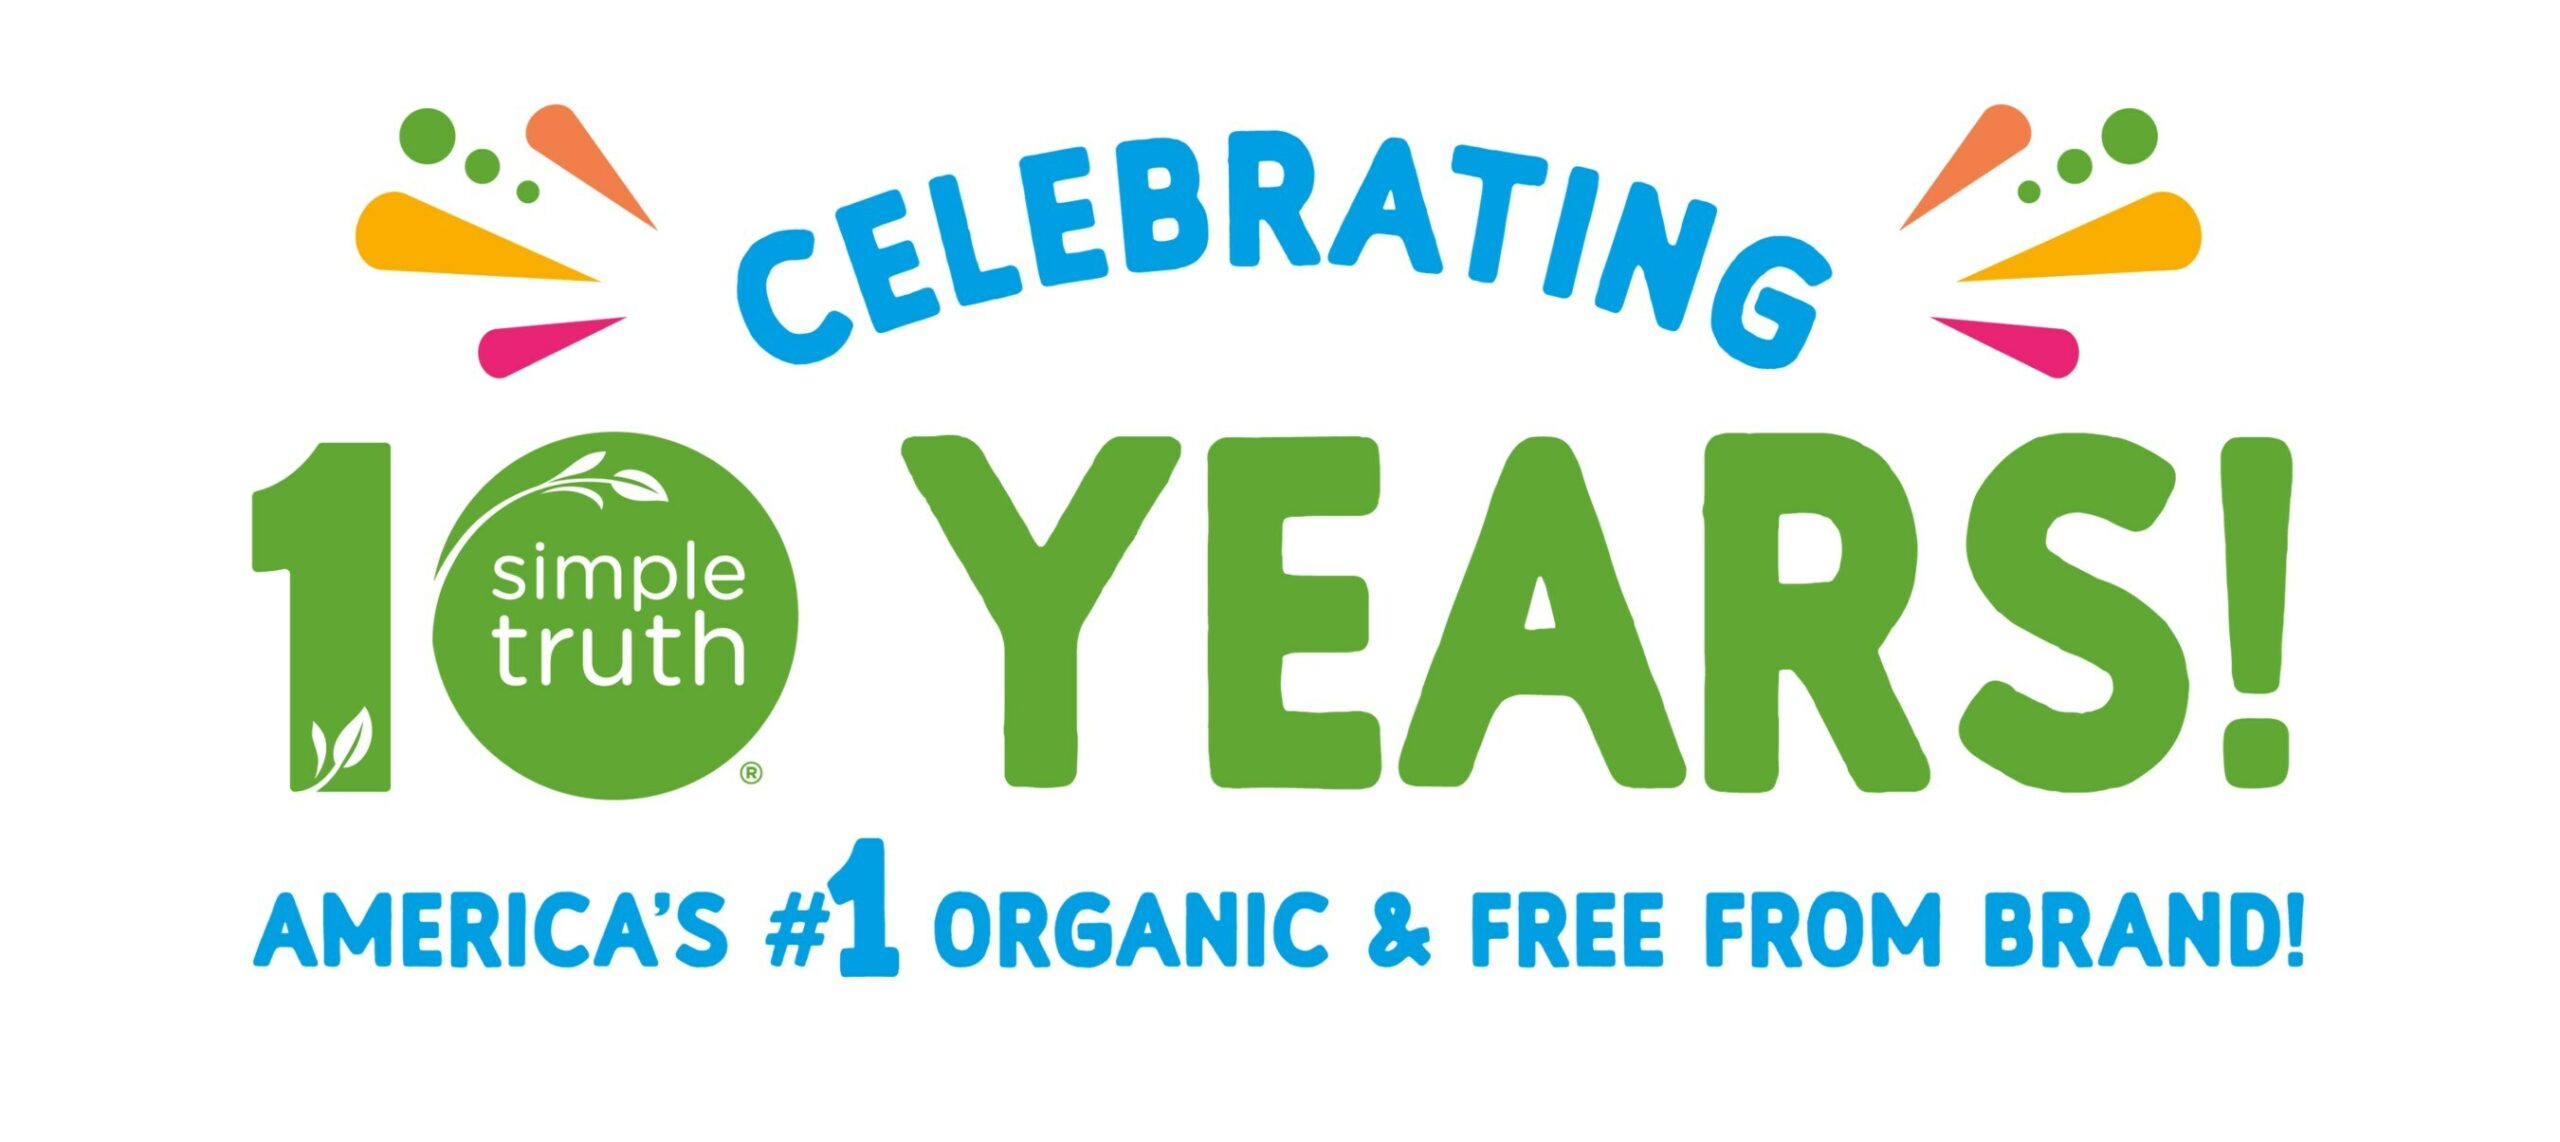 Kroger Celebrates 10 Years of Simple Truth®